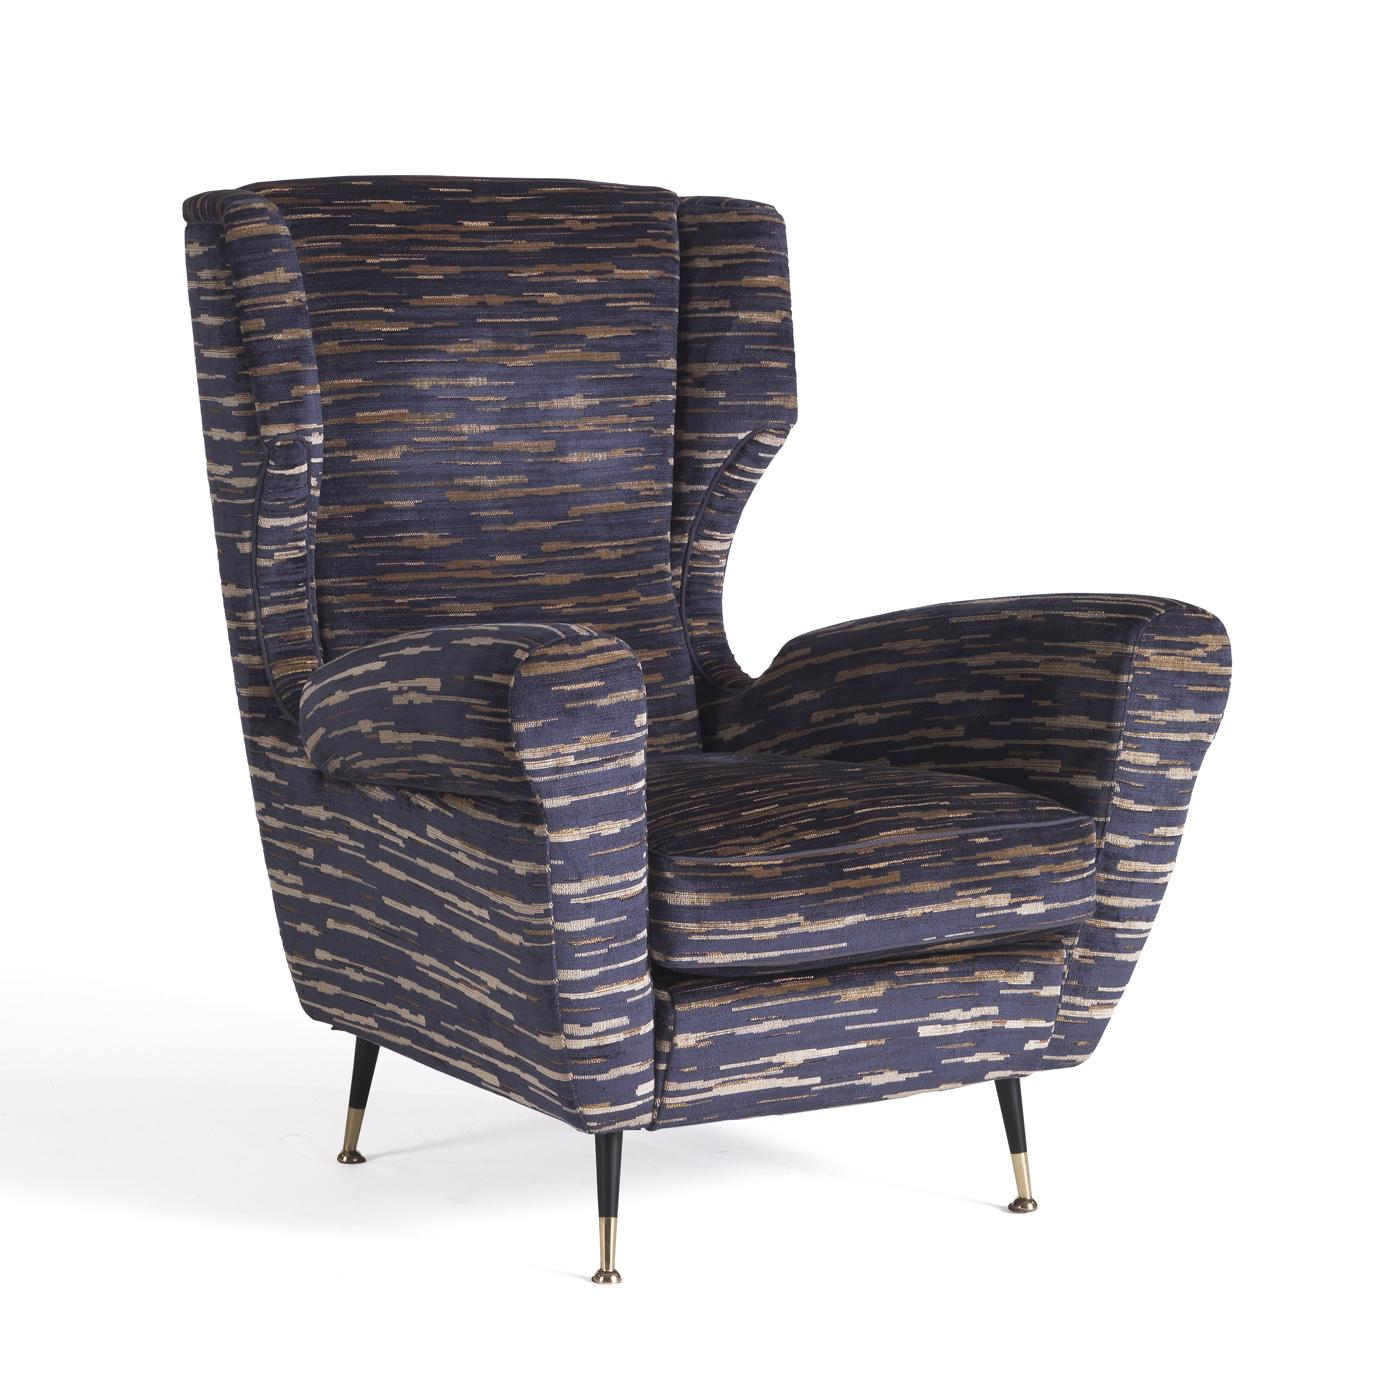 Exuding impeccable comfort in its welcoming and embracing silhouette, this armchair is a versatile piece of functional decor that will suit both residential and commercial interiors. Resting on black metal feet with a polished golden ferrules, the